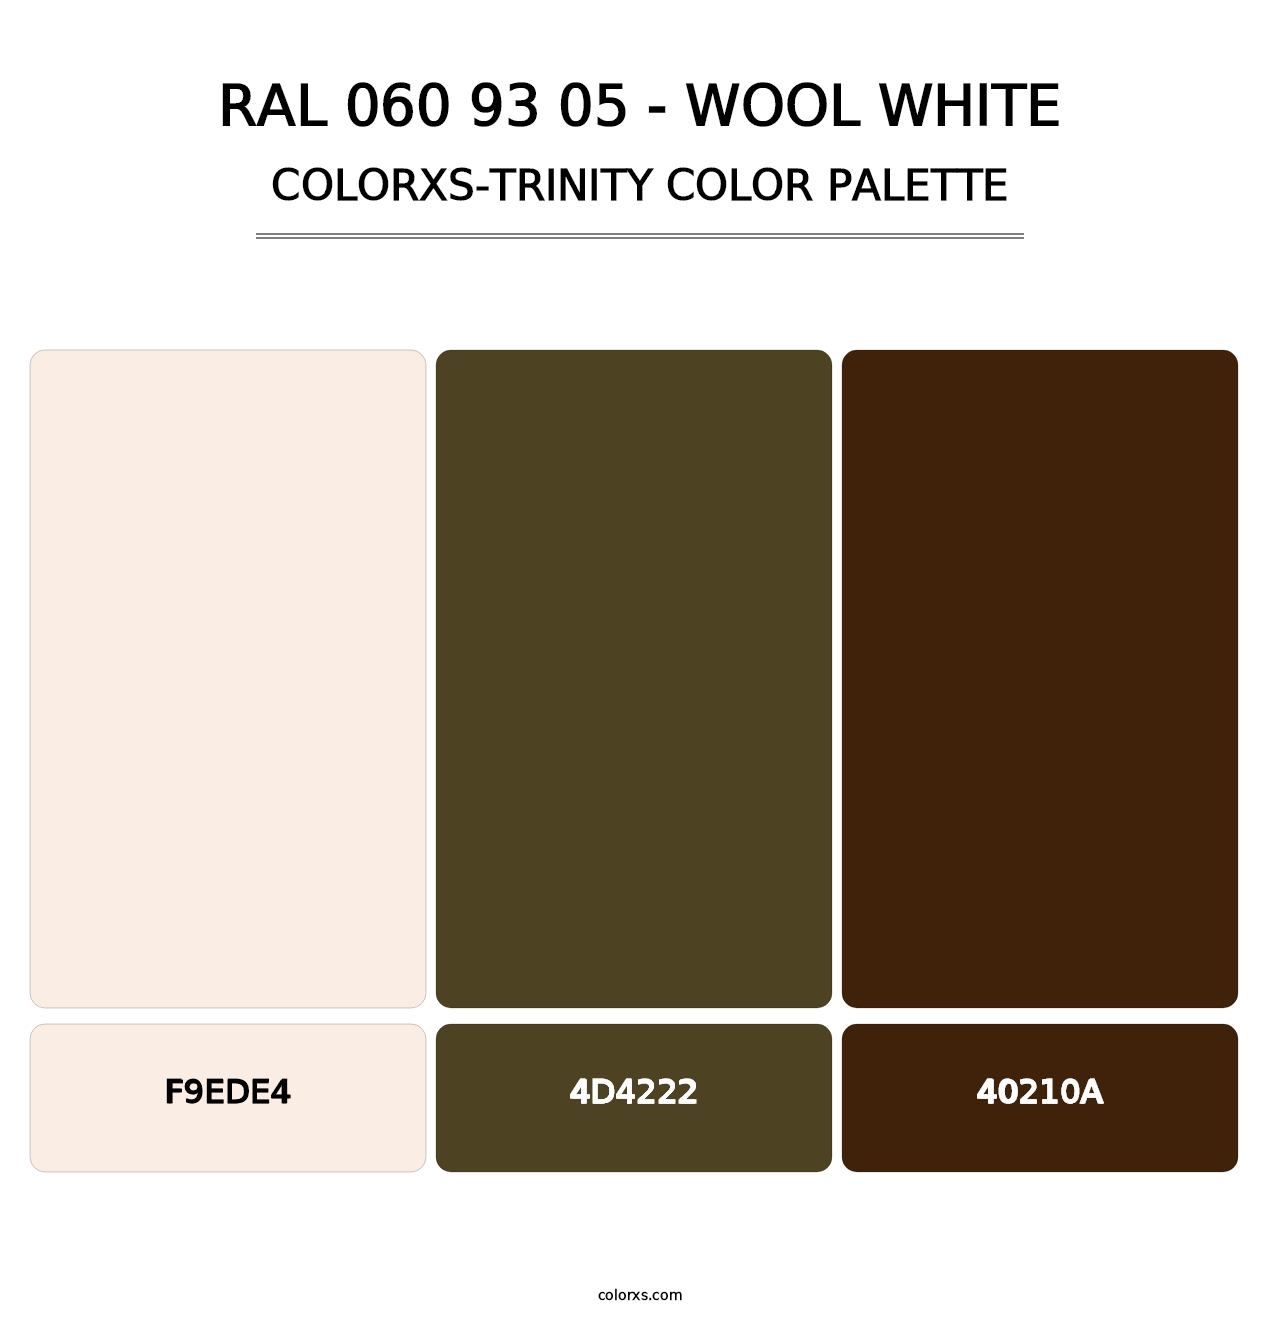 RAL 060 93 05 - Wool White - Colorxs Trinity Palette